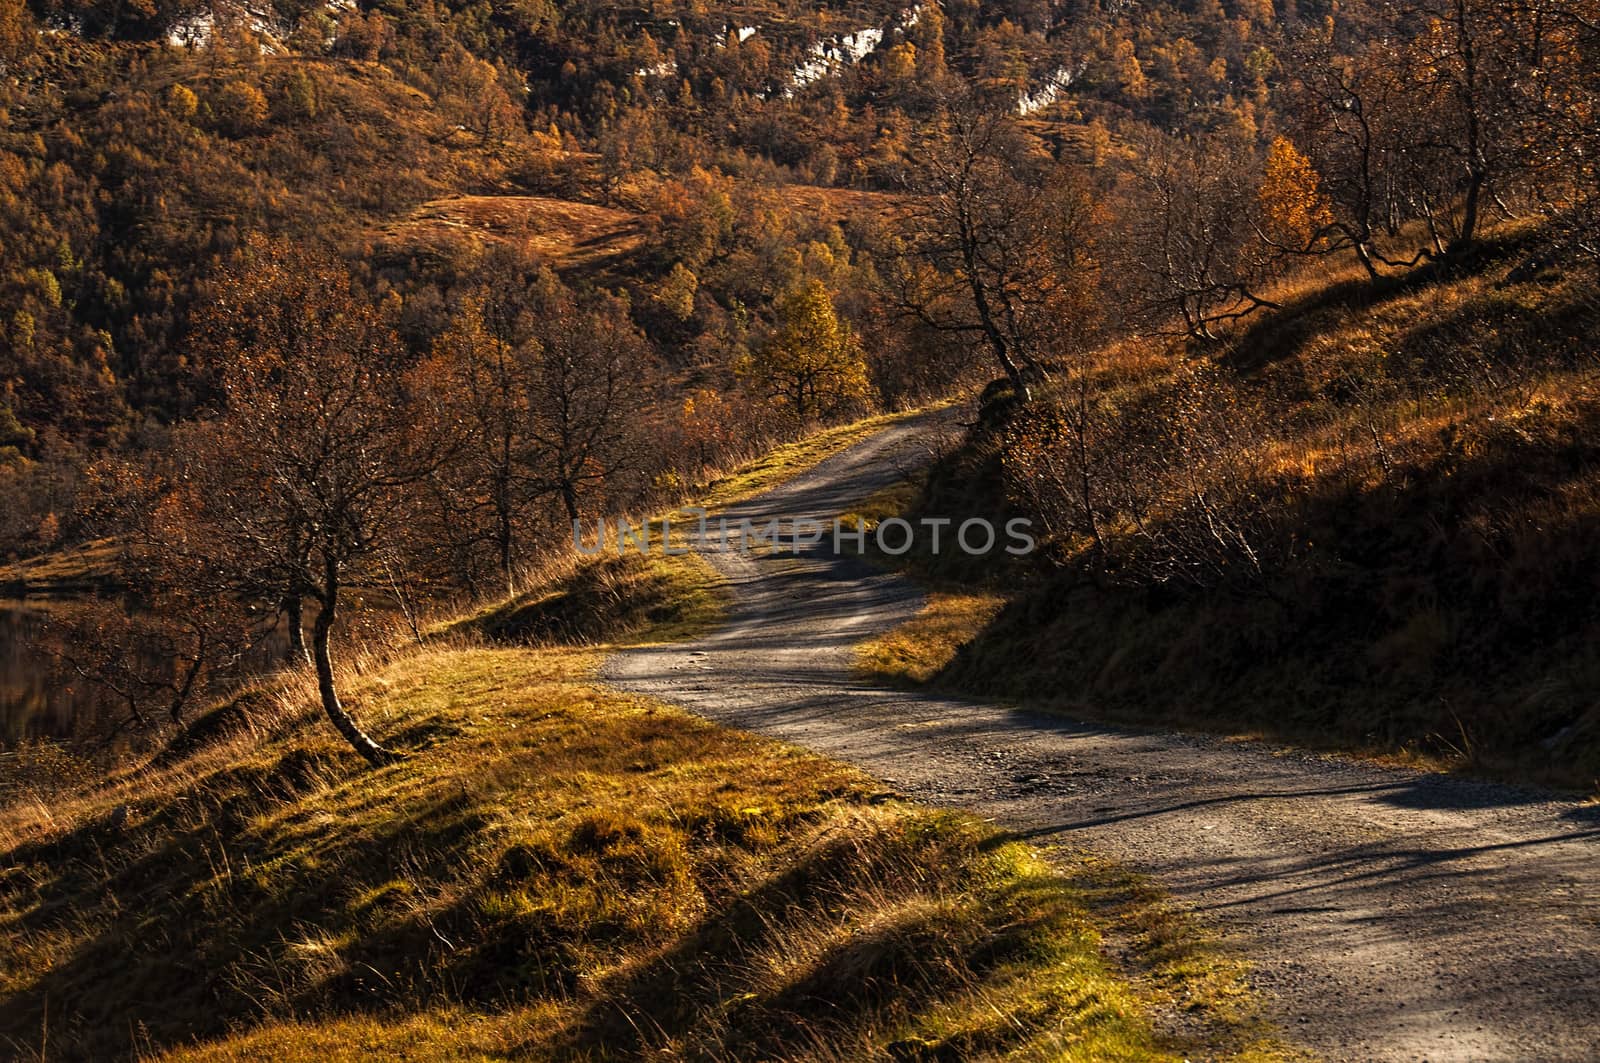 A mountain road in the shadows in autumn